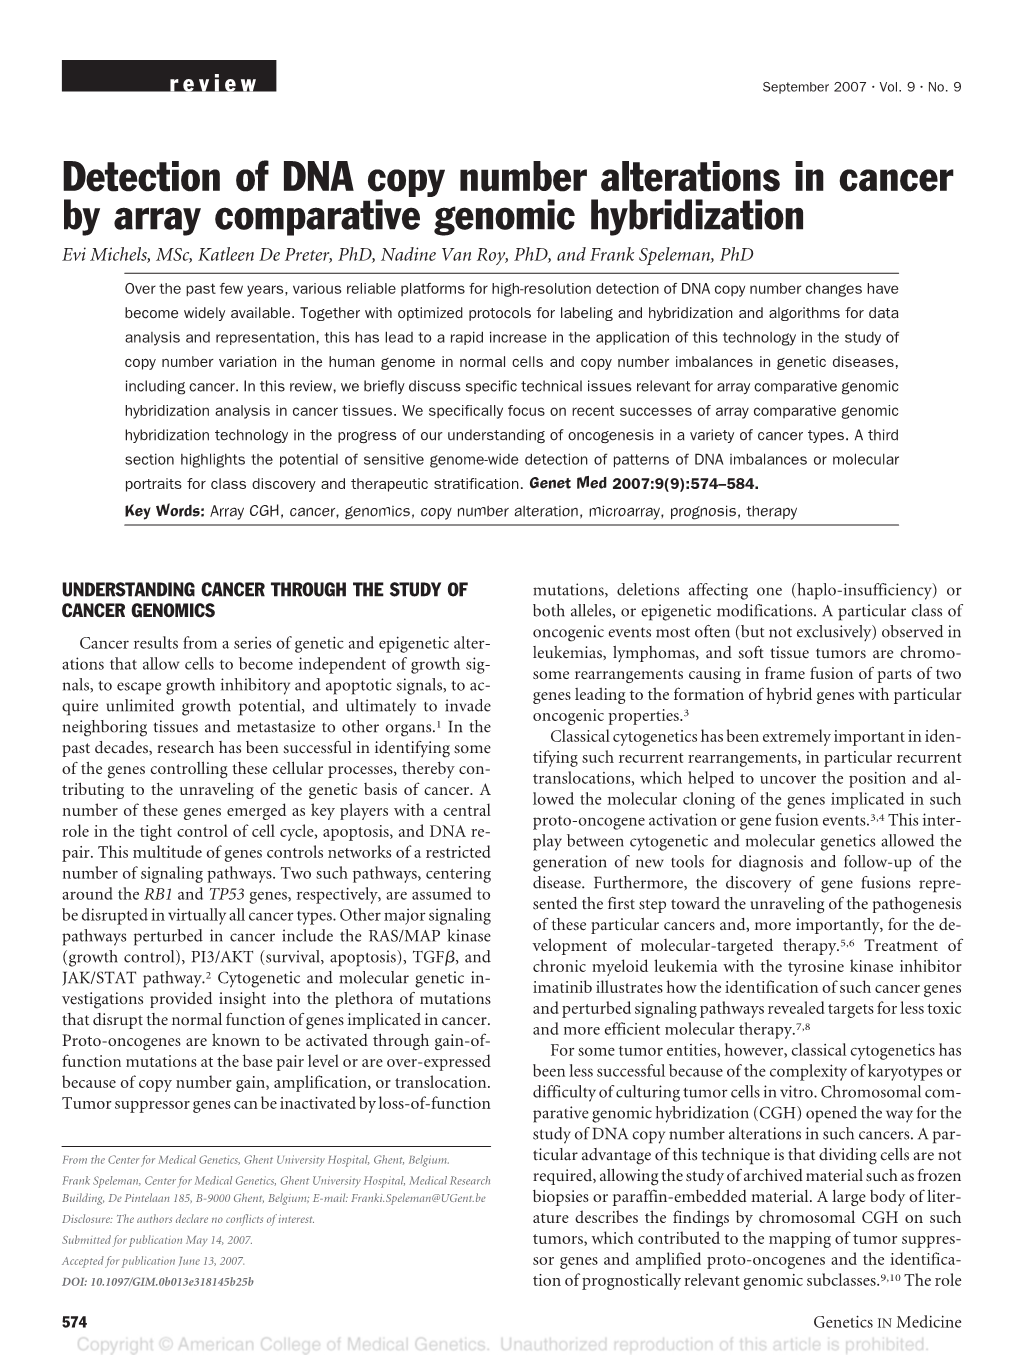 Detection of DNA Copy Number Alterations in Cancer by Array